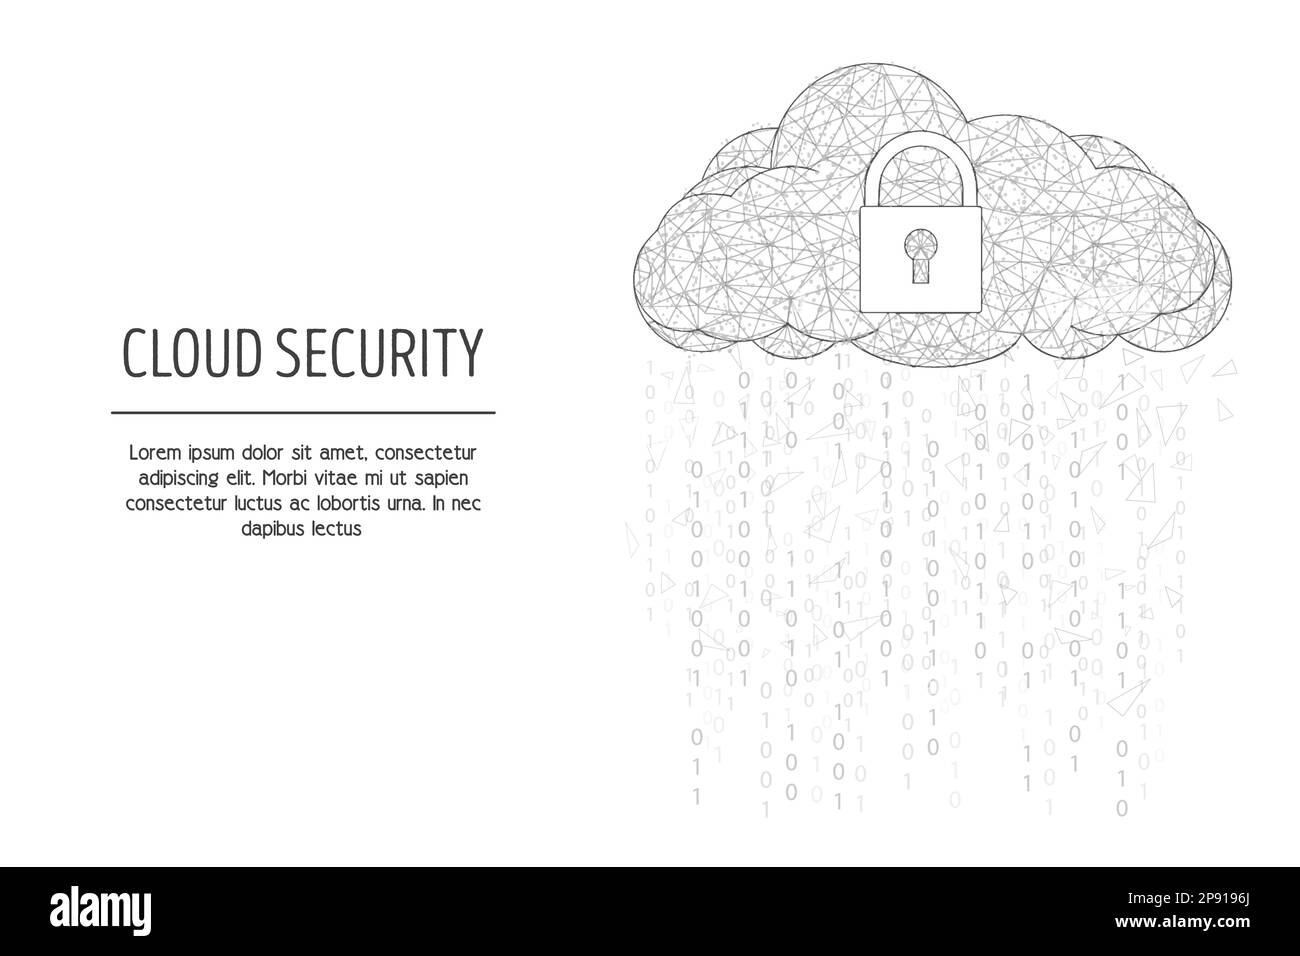 Cloud security web banner template, vector polygonal art style illustration Stock Vector